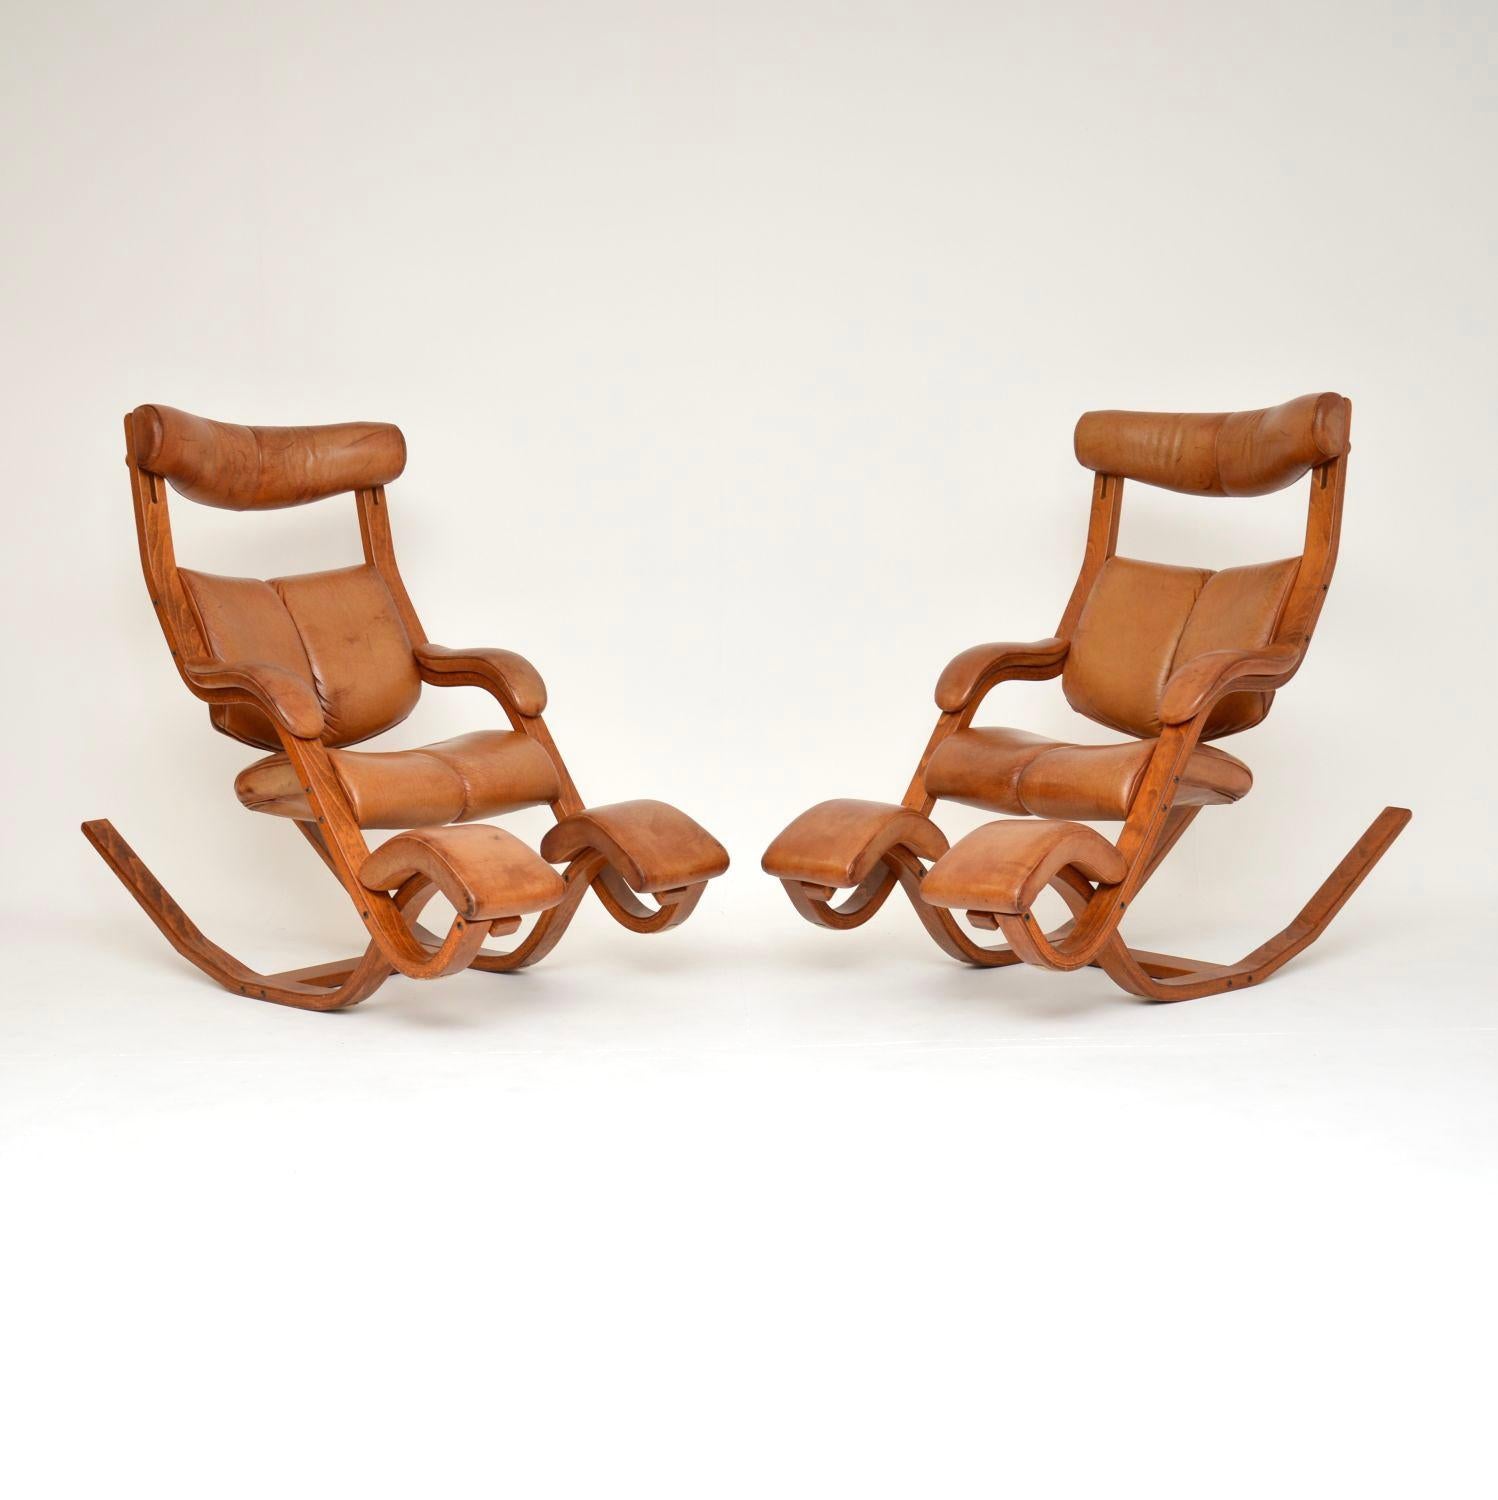 An amazing pair of reclining leather armchairs made by Stokke in Norway. They were designed by Peter Opsvik, this model is called the ‘Gravity Balans’. These date from around the 1980’s.

They are of superb quality, and the design is exceptional.